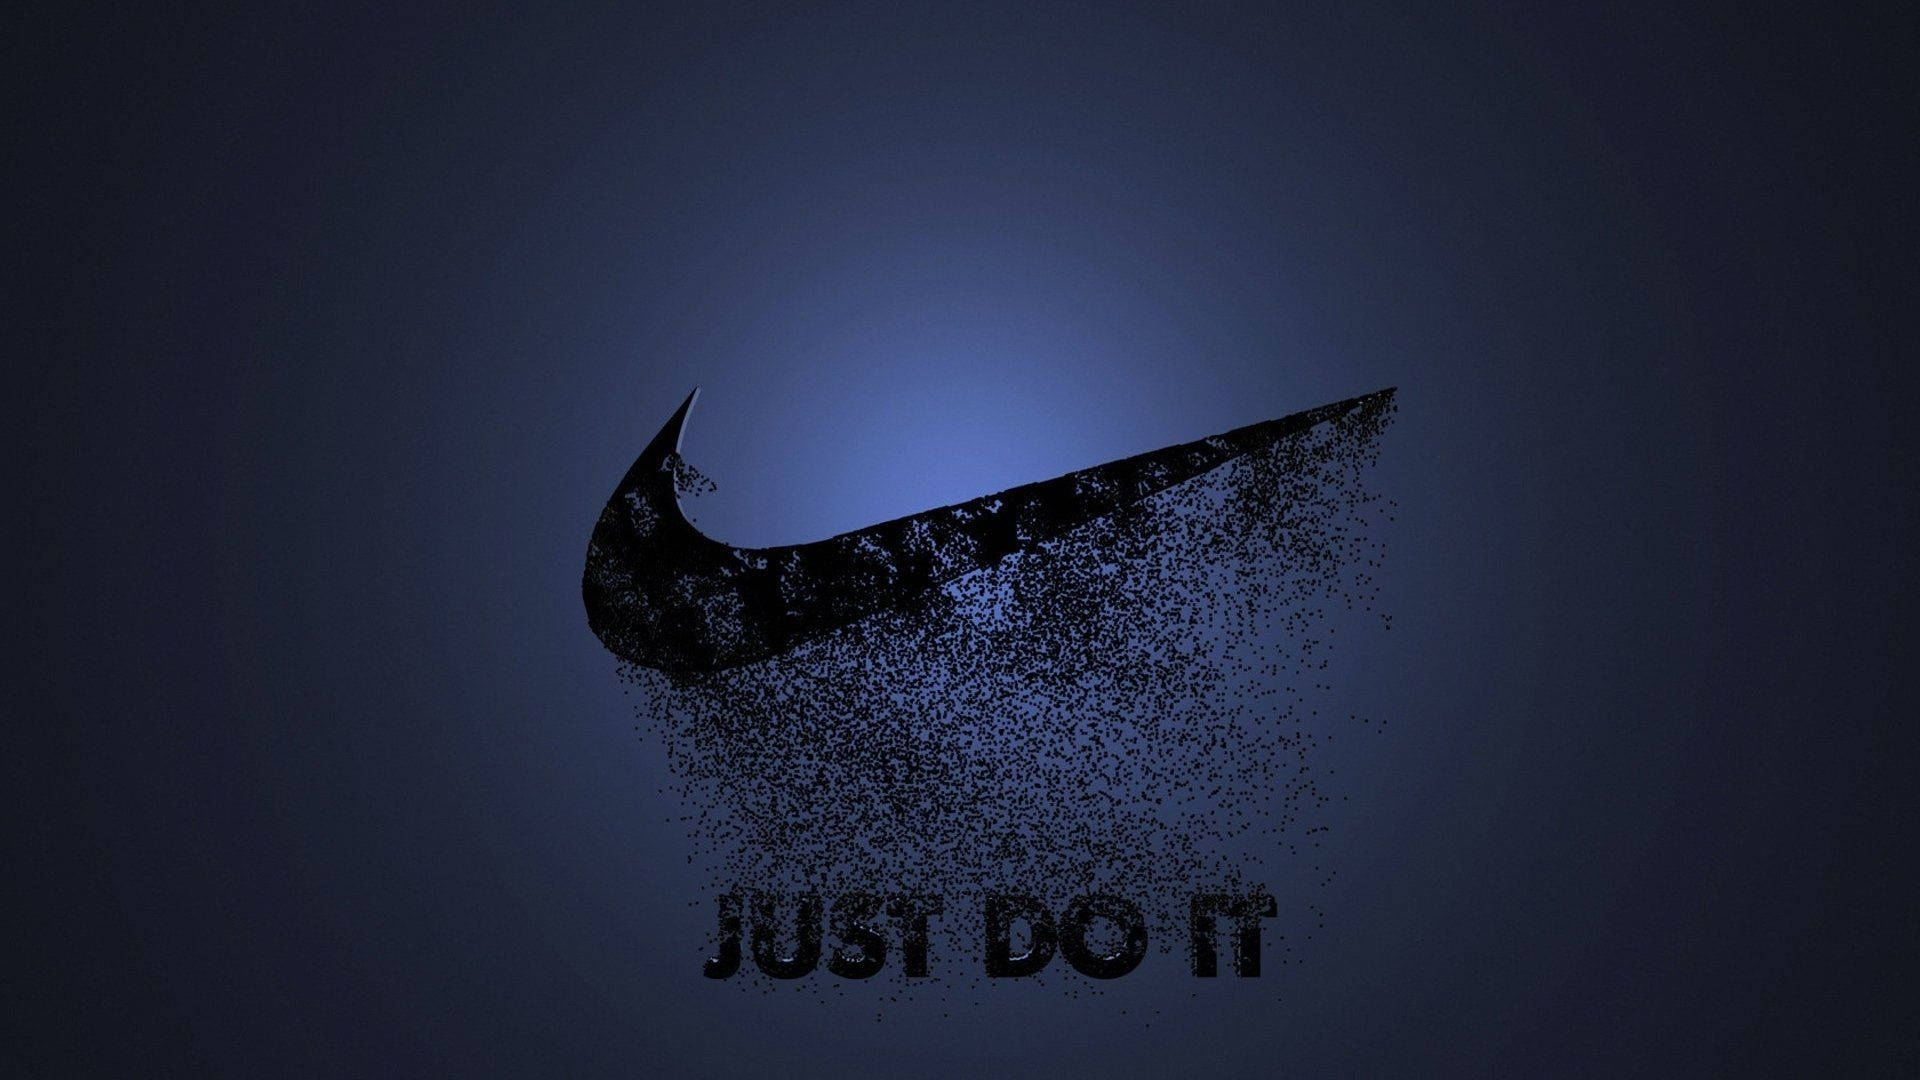 1920X1080 Nike Wallpaper and Background